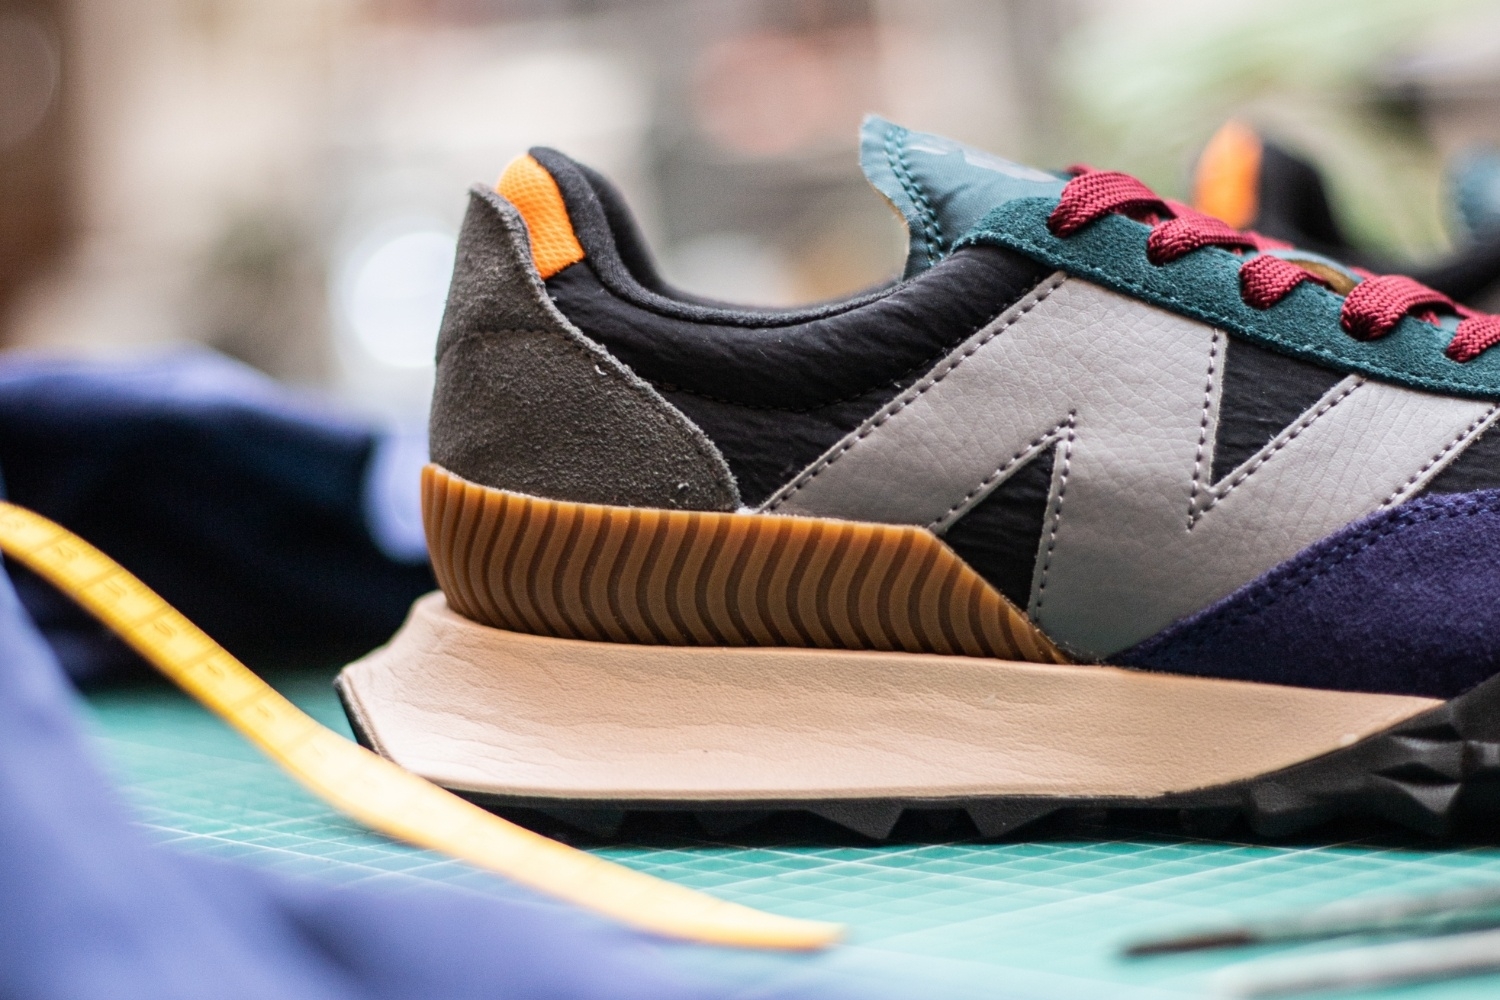 Sneakerjagers Interview: Charlotte Lee on her work as a designer and the New Balance XC-72